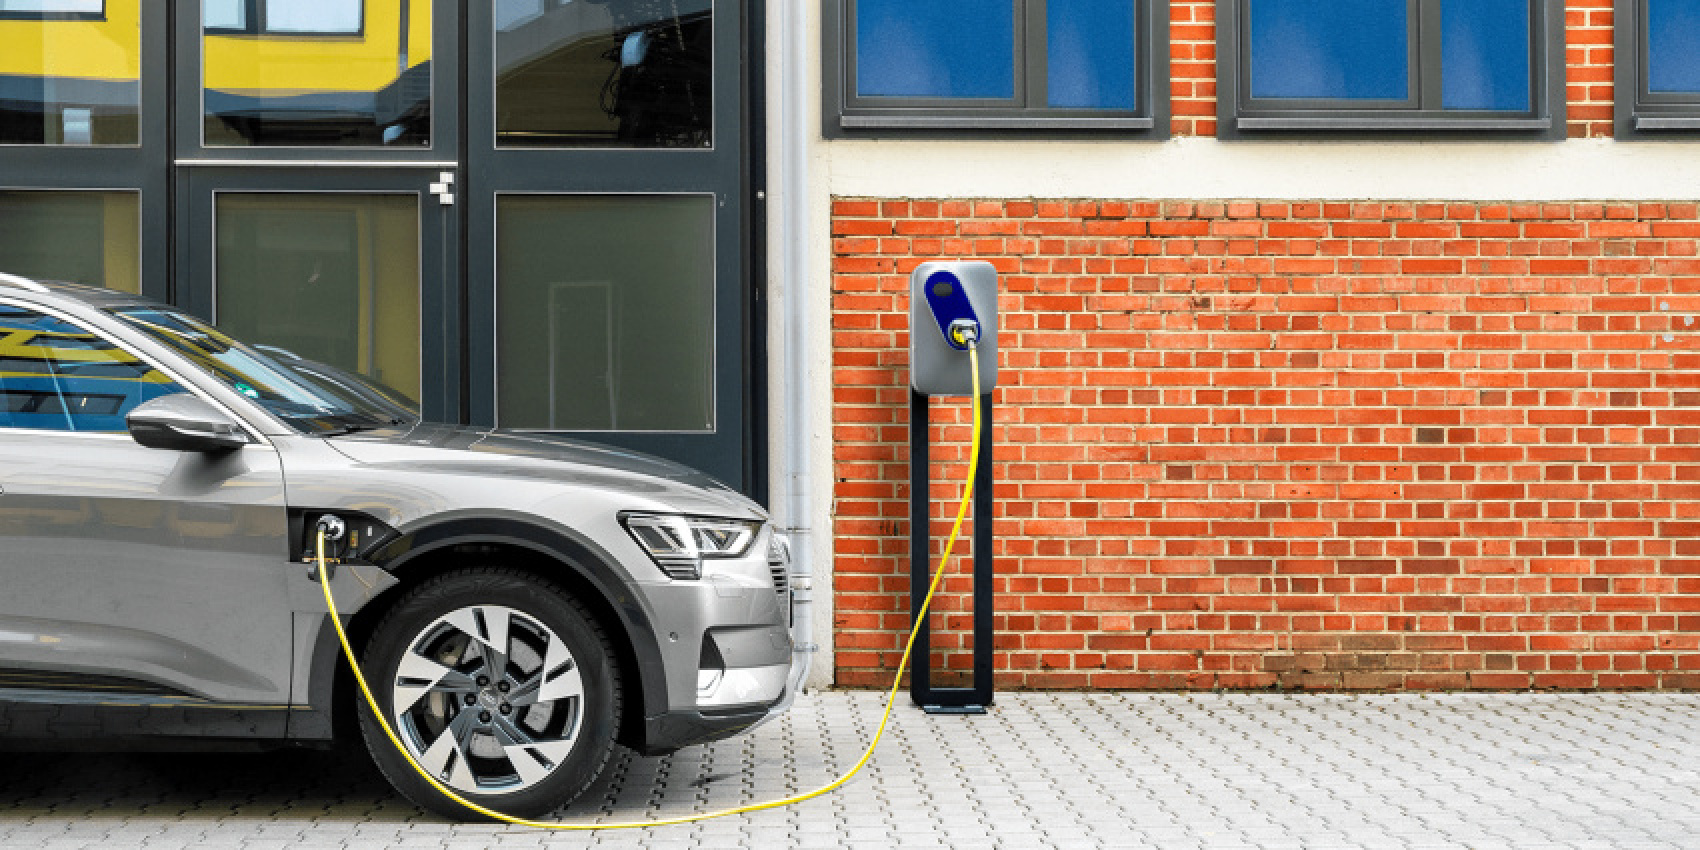 autos, cars, electric vehicle, short circuit, charging infrastructure, charging stations, olev, subsidies, time is running out for uk home charger subsidies